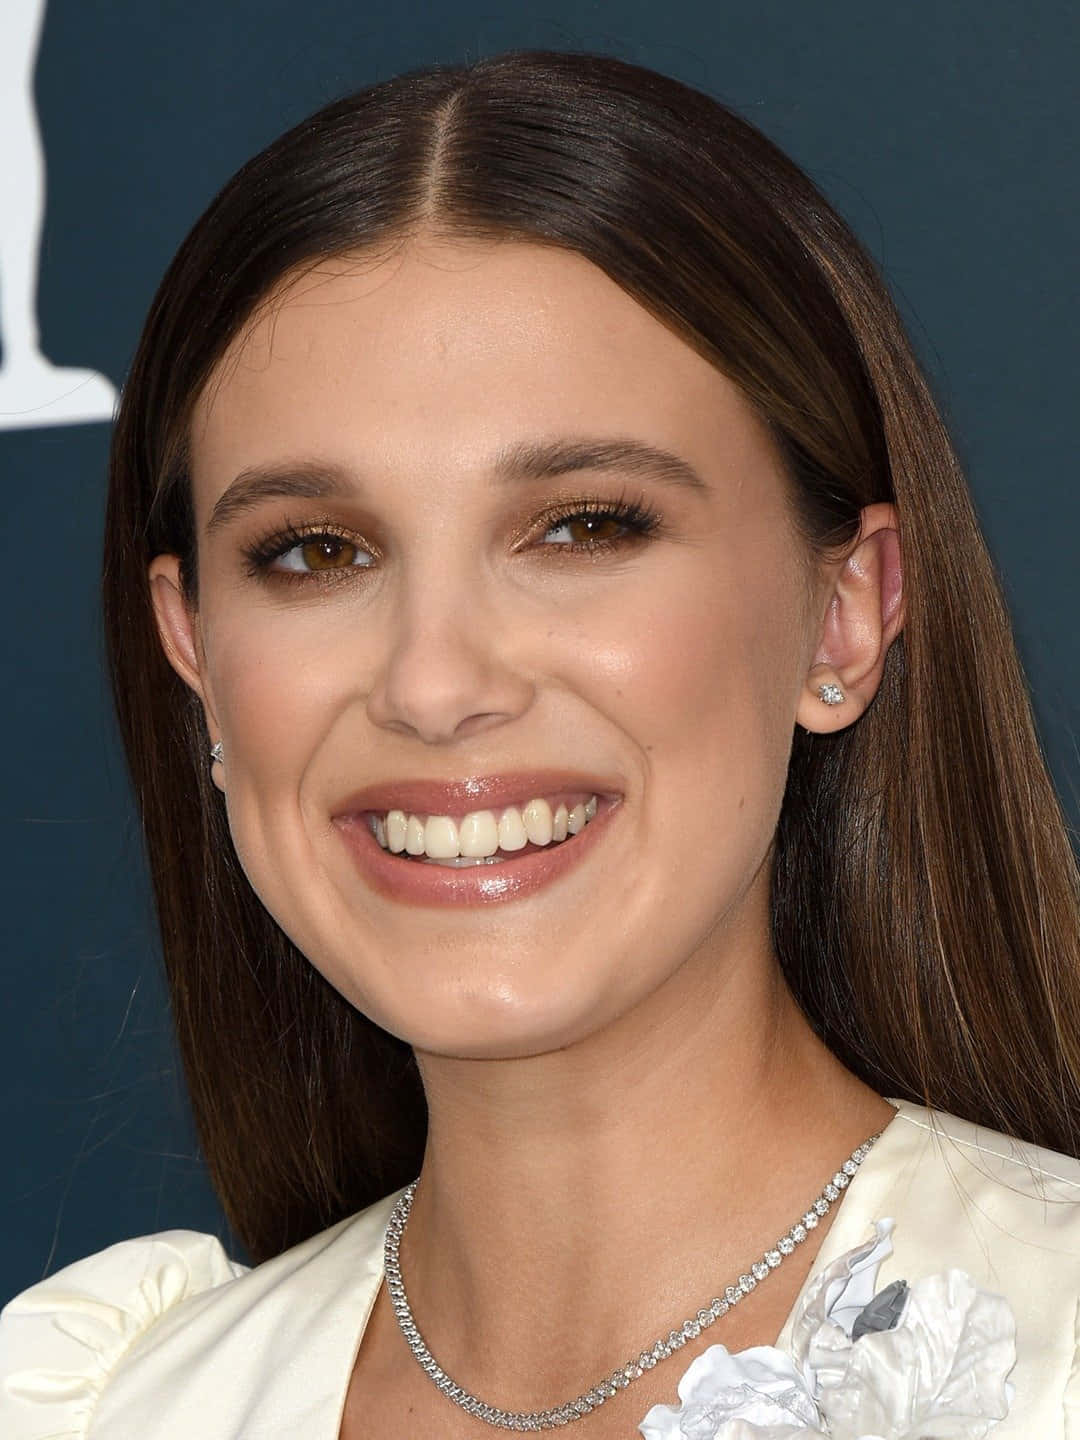 Millie Bobby Brown delivers a powerful message onstage.